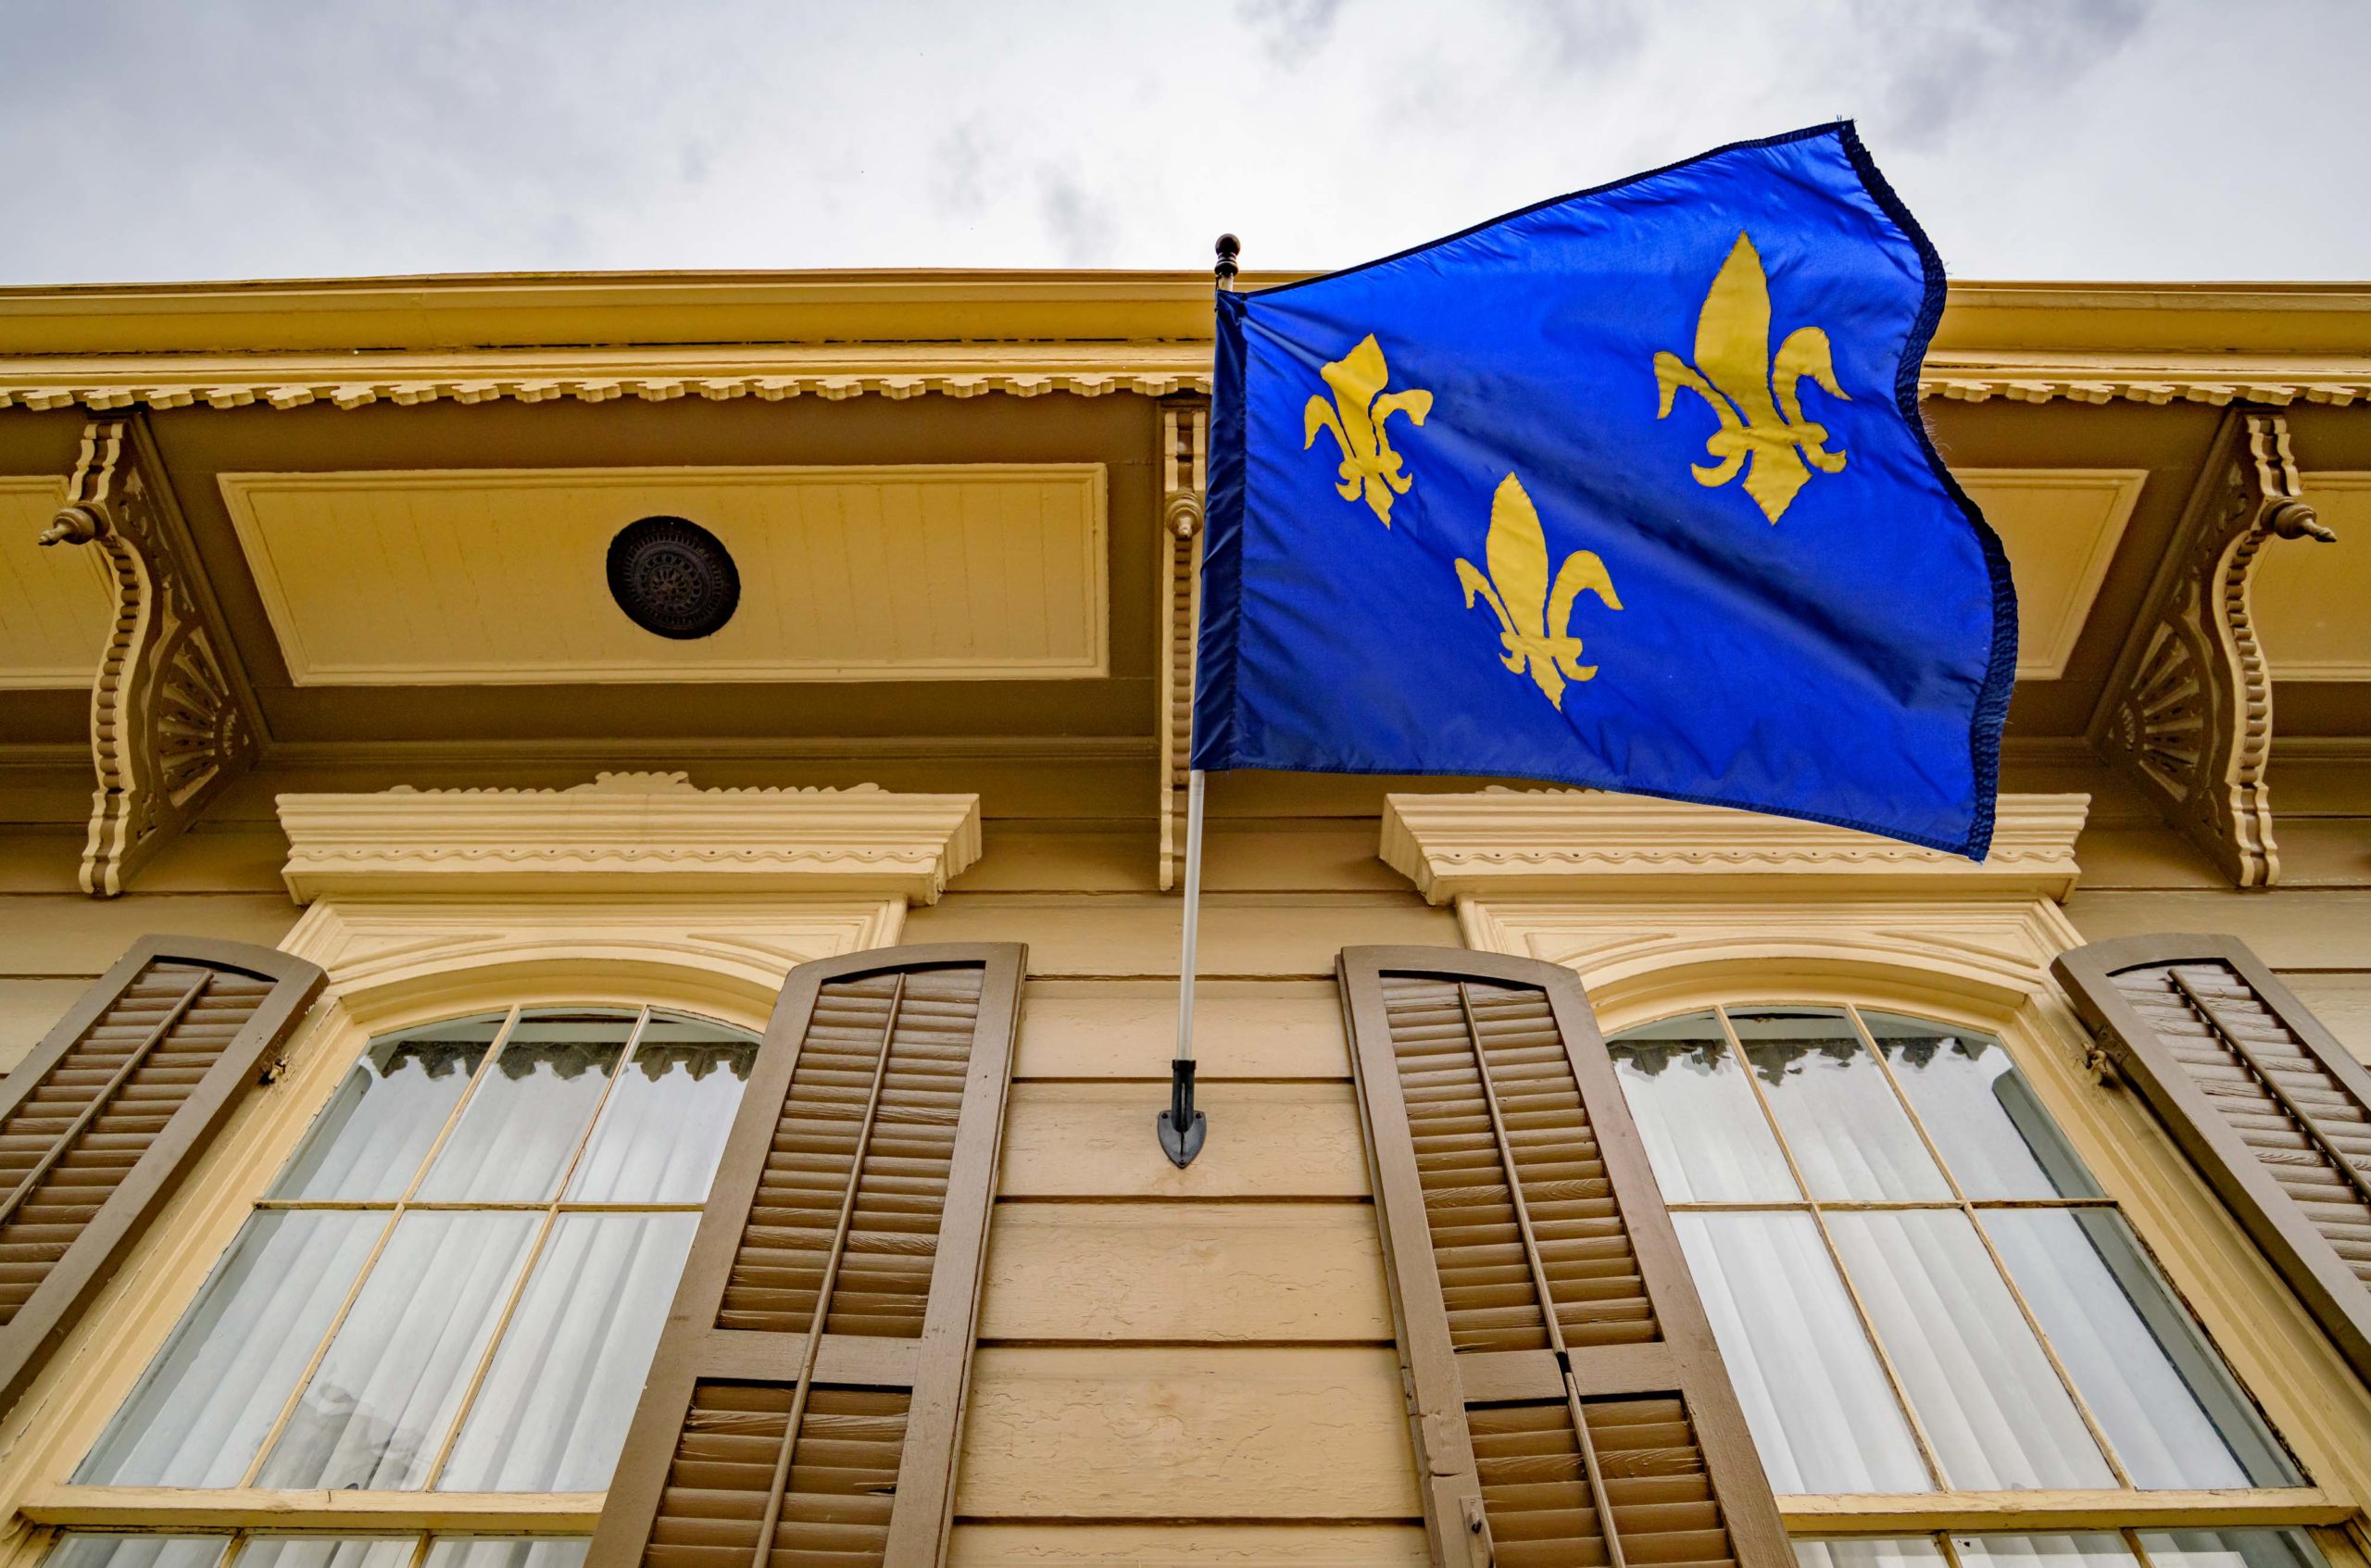 1)

#FleurDeLis : A blue Capetain flag that was the former flag of the Kingdom of France flies in the French Quarter in New Orleans. The Fleur-de-lis or lily flower is an old symbol that has French and Middle Eastern origin and often represents the Catholic saints of France. Today it represents the New Orleans Saints and appears in the flag of the city of New Orleans and Detroit.  📸@MattHintonPhoto for @VeryLocalNOLA

#VLNOLA #CapetianFlag #NewOrleans #NewOrleansSaints #FrenchQuarter #FrenchQuarterArchitecture #Louisiana

2)

#FleurDeLis : A Fleur-de-lis bonfire burns on Christmas Eve on the Mississippi River levee in St. James Parish near New Orleans, Louisiana. Residents light bonfires along the Mississippi River levee to attract the attention of Papa Noel, the French Daddy Christmas. 📸@MattHintonPhoto for @VeryLocalNOLA

#VLNOLA #NewOrleans #Louisiana #NewOrleansSaints #MississippiRiverLevee #bonfire #StJamesParish #PapaNoel #DaddyChristmas

3)

#FleurDeLis : The John Gauche Home, built in 1856, is an example of Italianate architecture with an iron fence with upside Fleur-de-lis symbols inside heart shapes in the French Quarter in New Orleans. The Fleur-de-lis or lily flower is called giglio bottonato in Italy and it is the symbol of the city of Florence, Italy and is sometimes called Giglio di Firenze (Lily of Florence). The Italian giglio bottonato often has stamens between the flower petals The Fleur-de-lis is an old symbol that has French and Middle Eastern origin and often represents the Catholic saints of France. Today it represents the New Orleans Saints and appears in the flag of the city of New Orleans and Detroit.  📸@MattHintonPhoto for @VeryLocalNOLA

#VLNOLA #CapetianFlag #NewOrleans #NewOrleansSaints #FrenchQuarter #FrenchQuarterArchitecture #Louisiana #GigliodiFirenze #florence